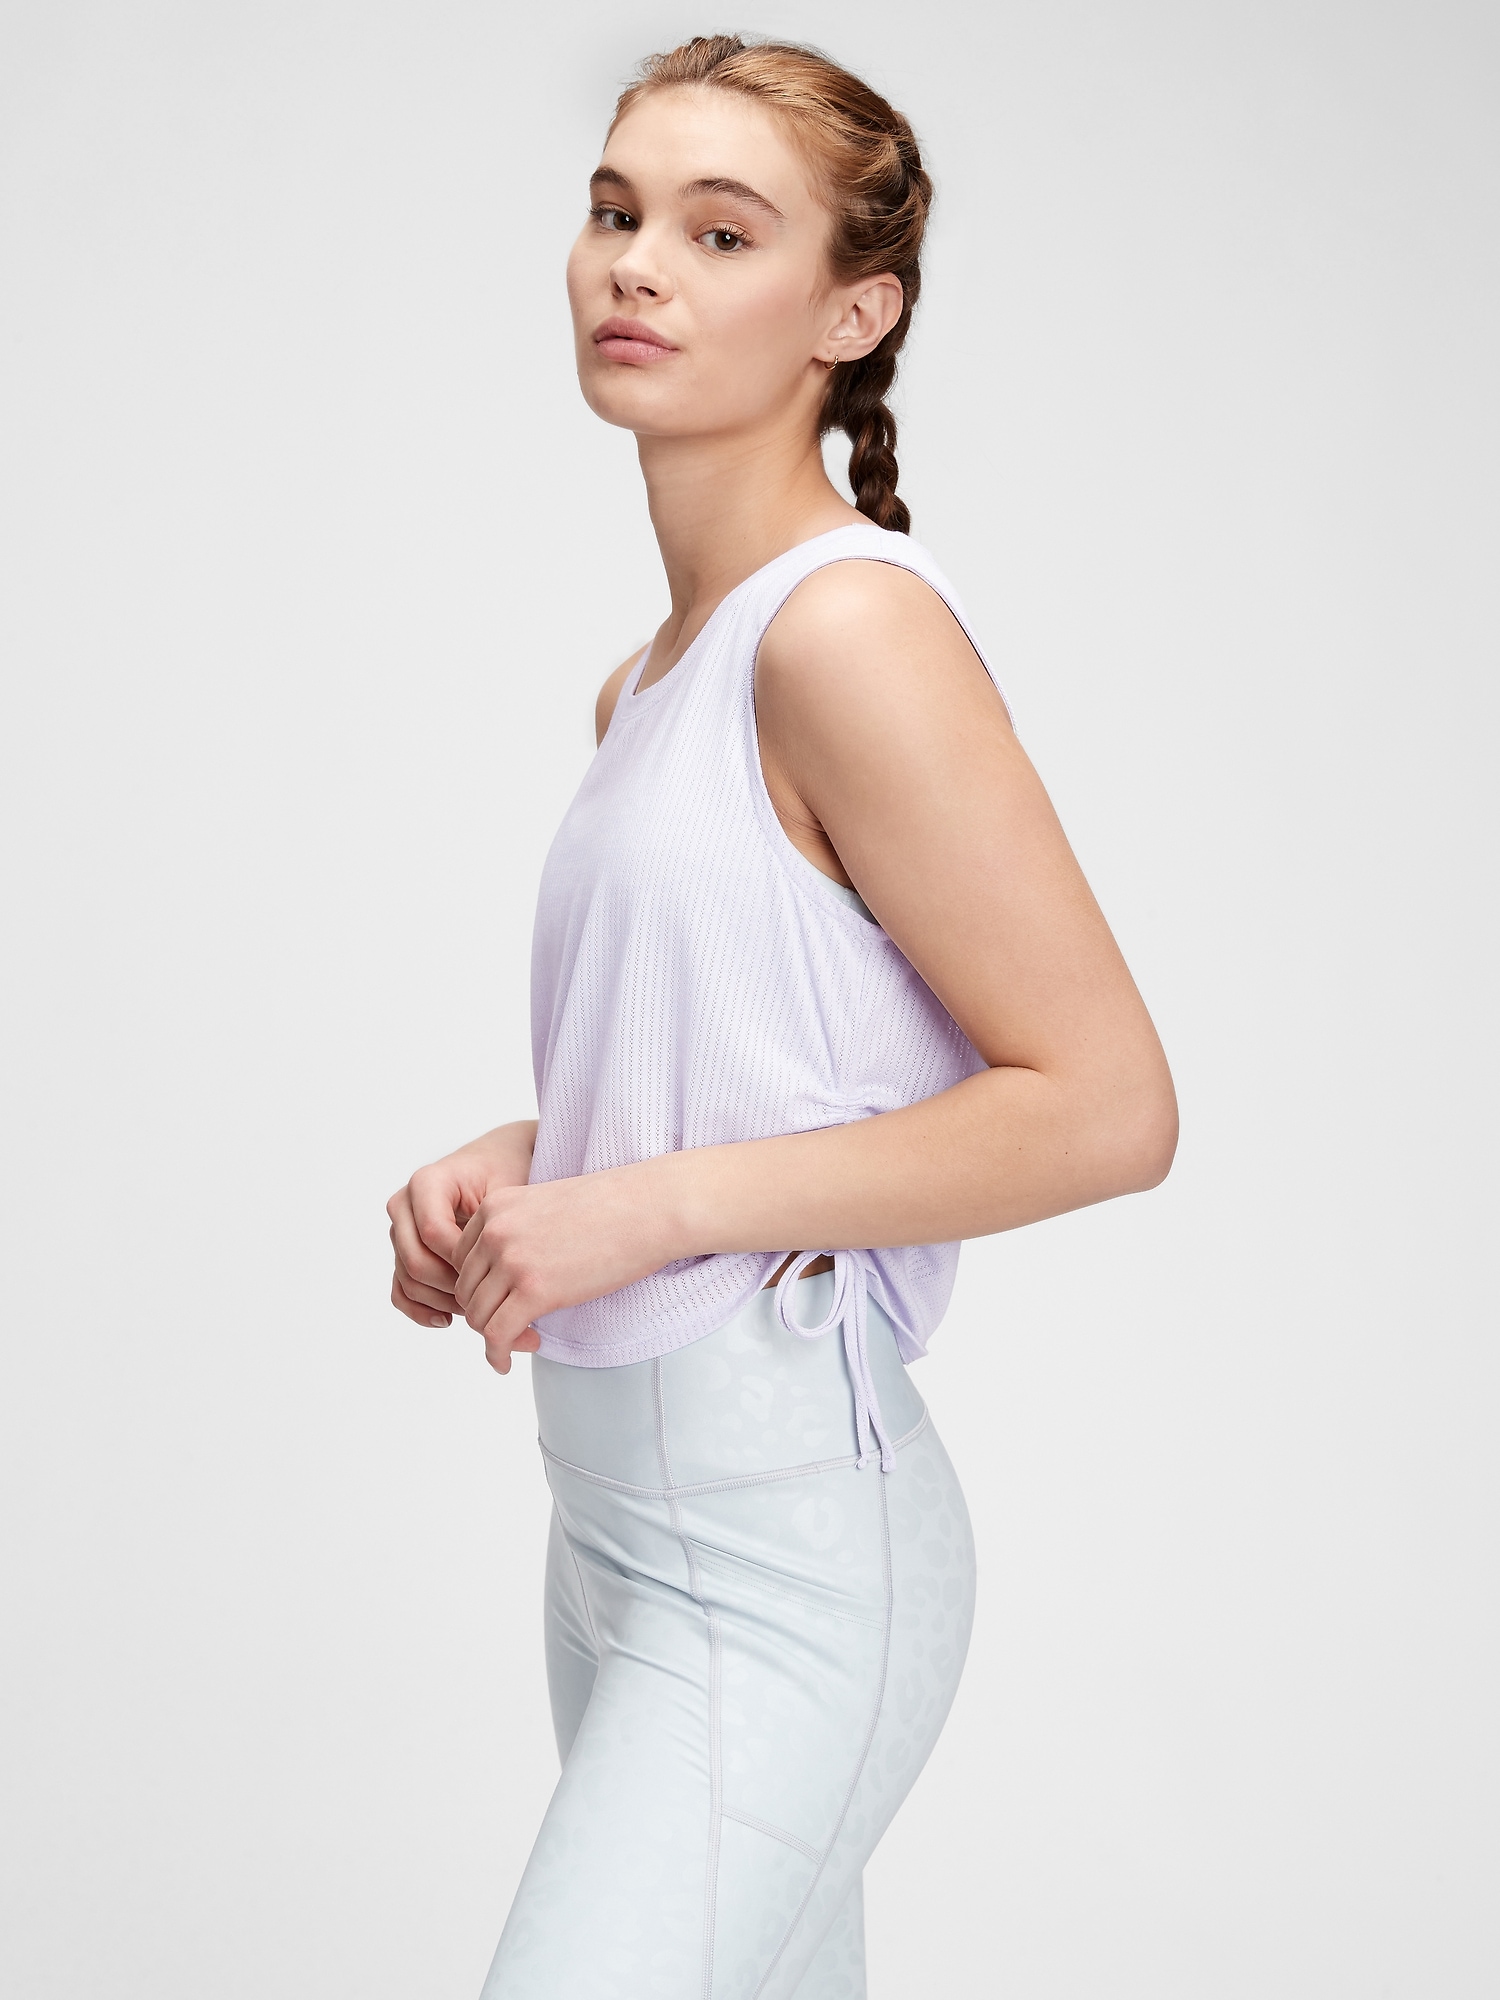 GapFit Breathe Pointelle Ruched Side Tank Top